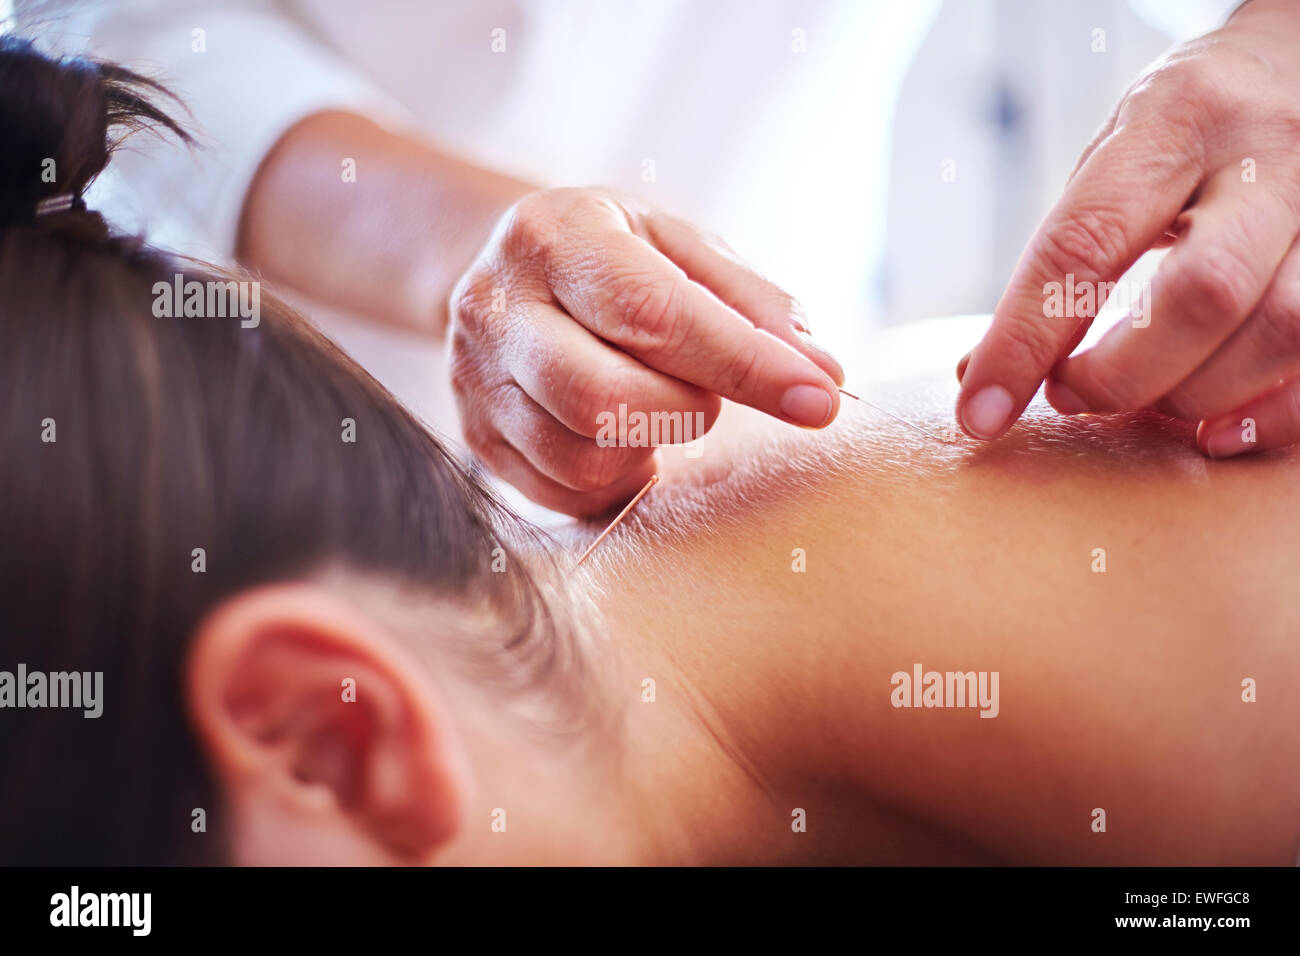 Close up acupuncturist applying acupuncture needles to woman’s neck Stock Photo